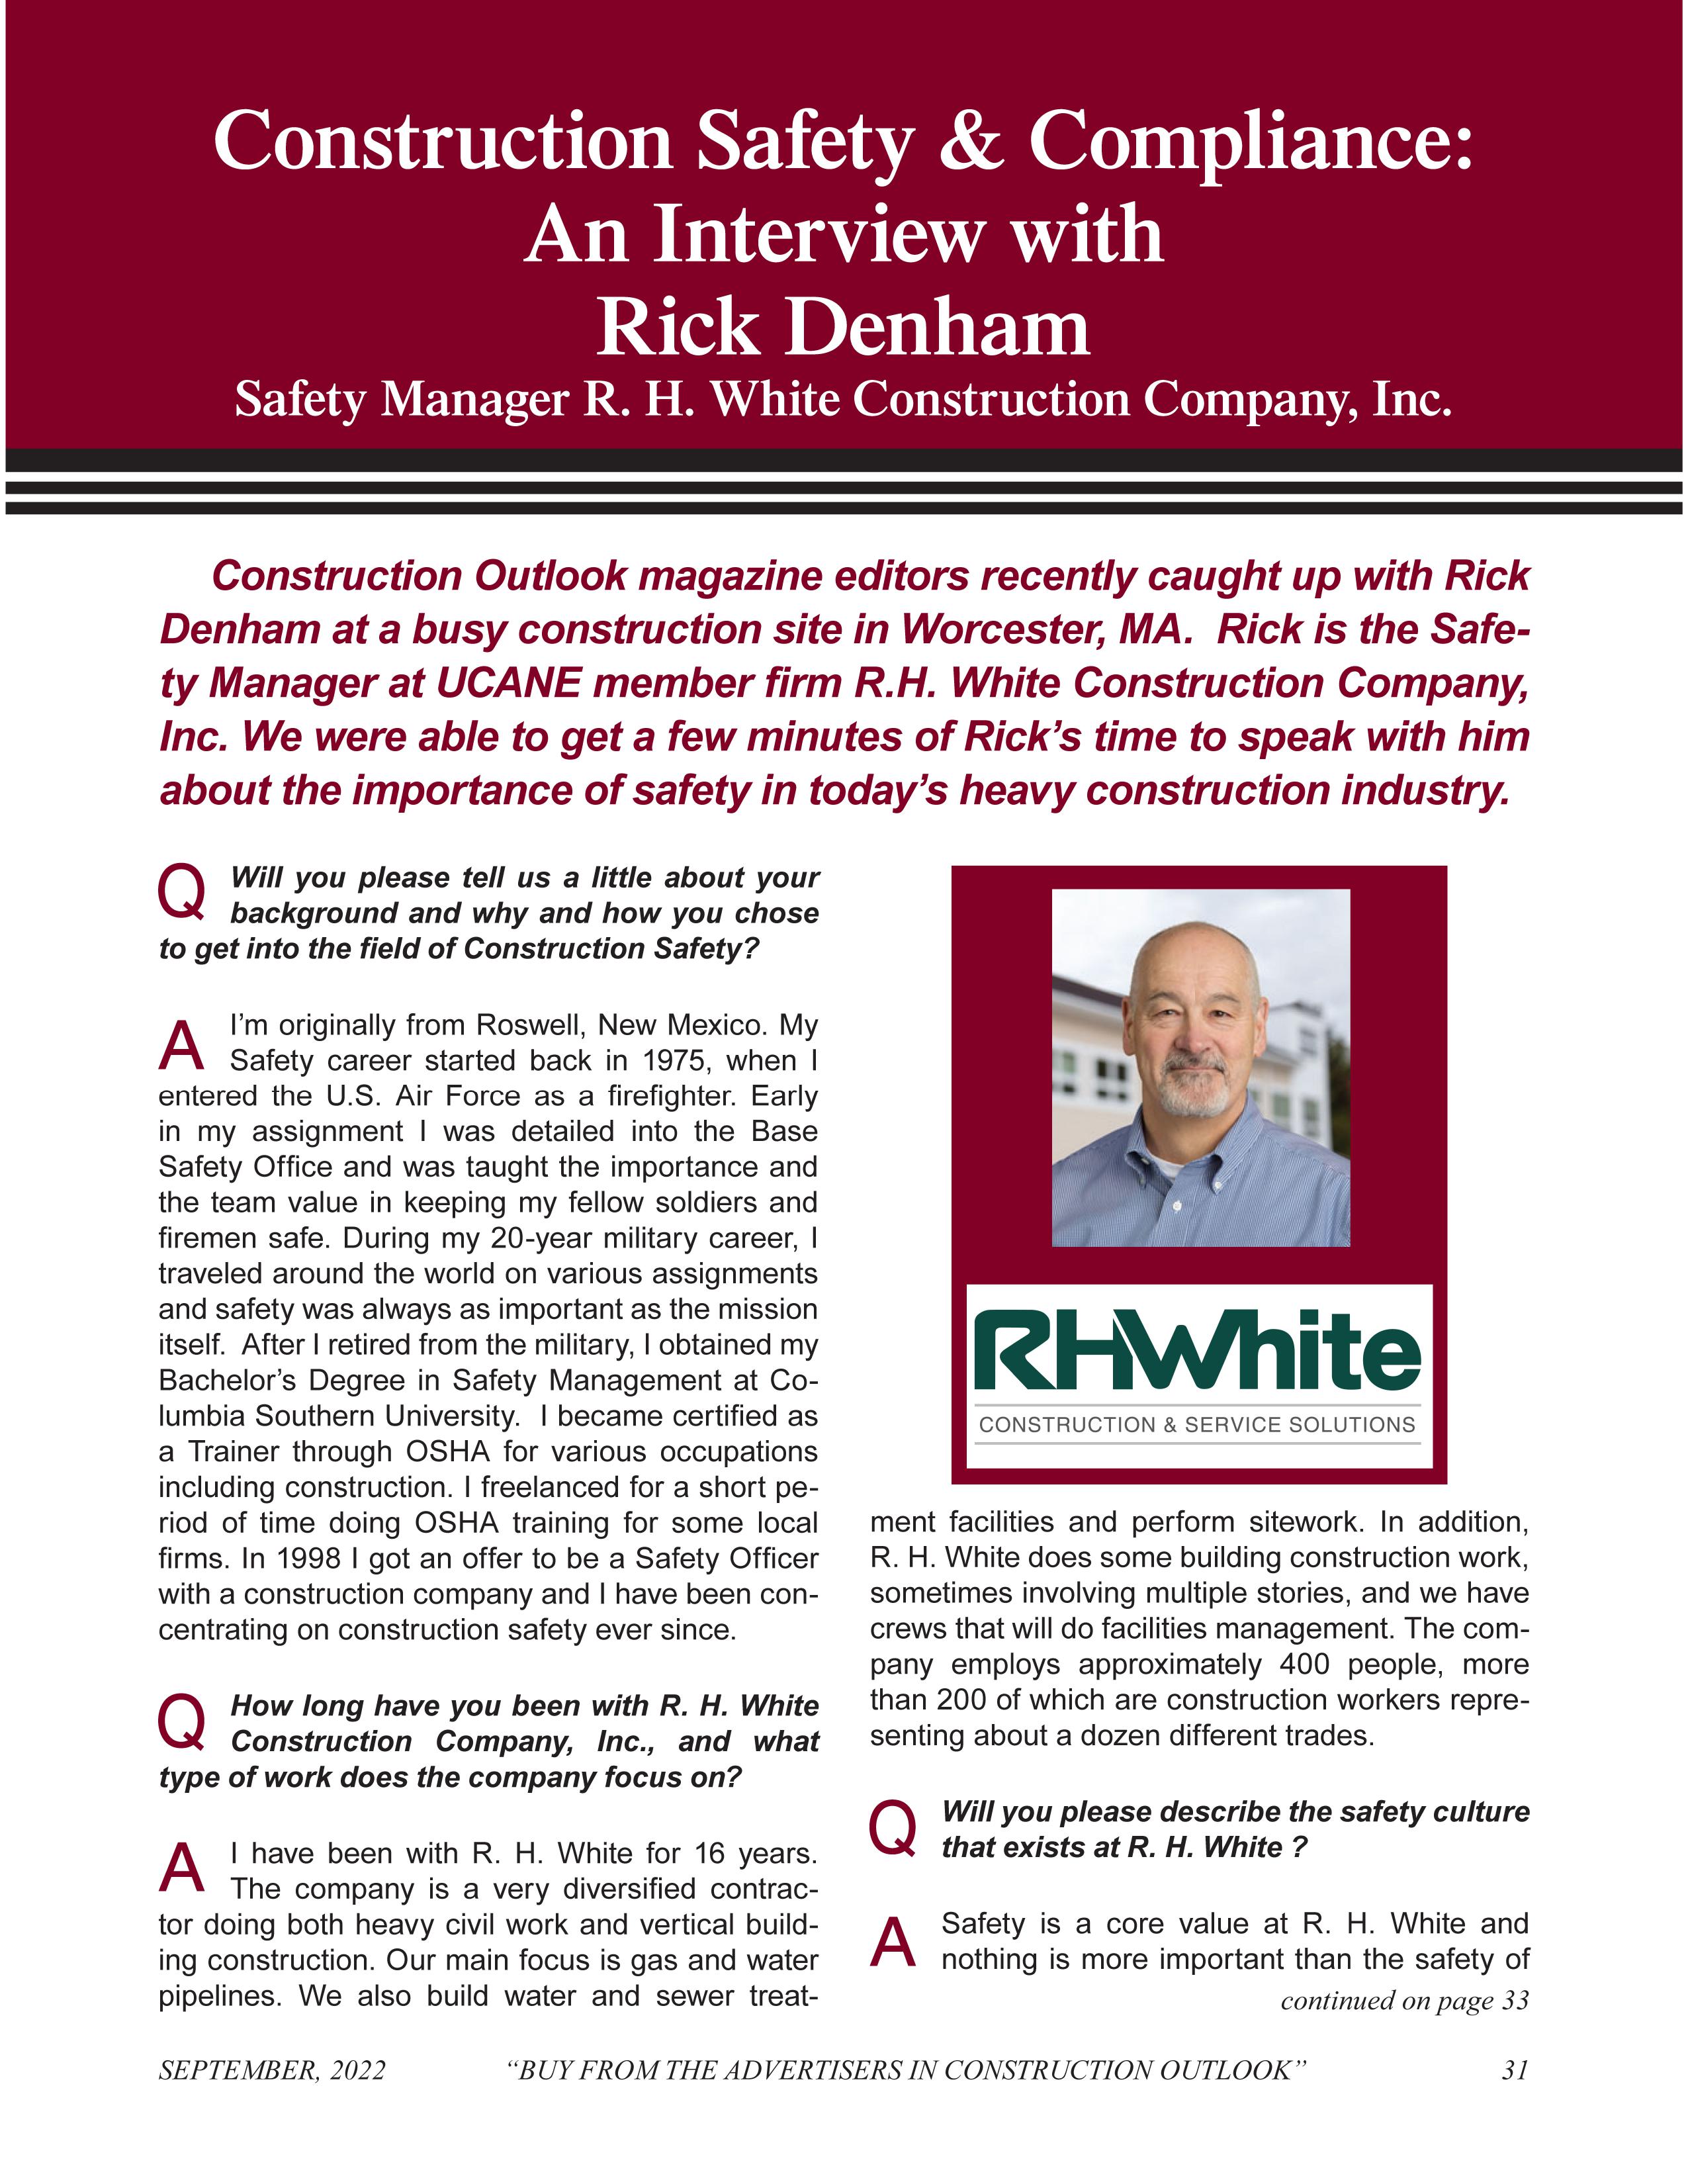 Construction Safety & Compliance: An Interview with Rich Denham Page 1